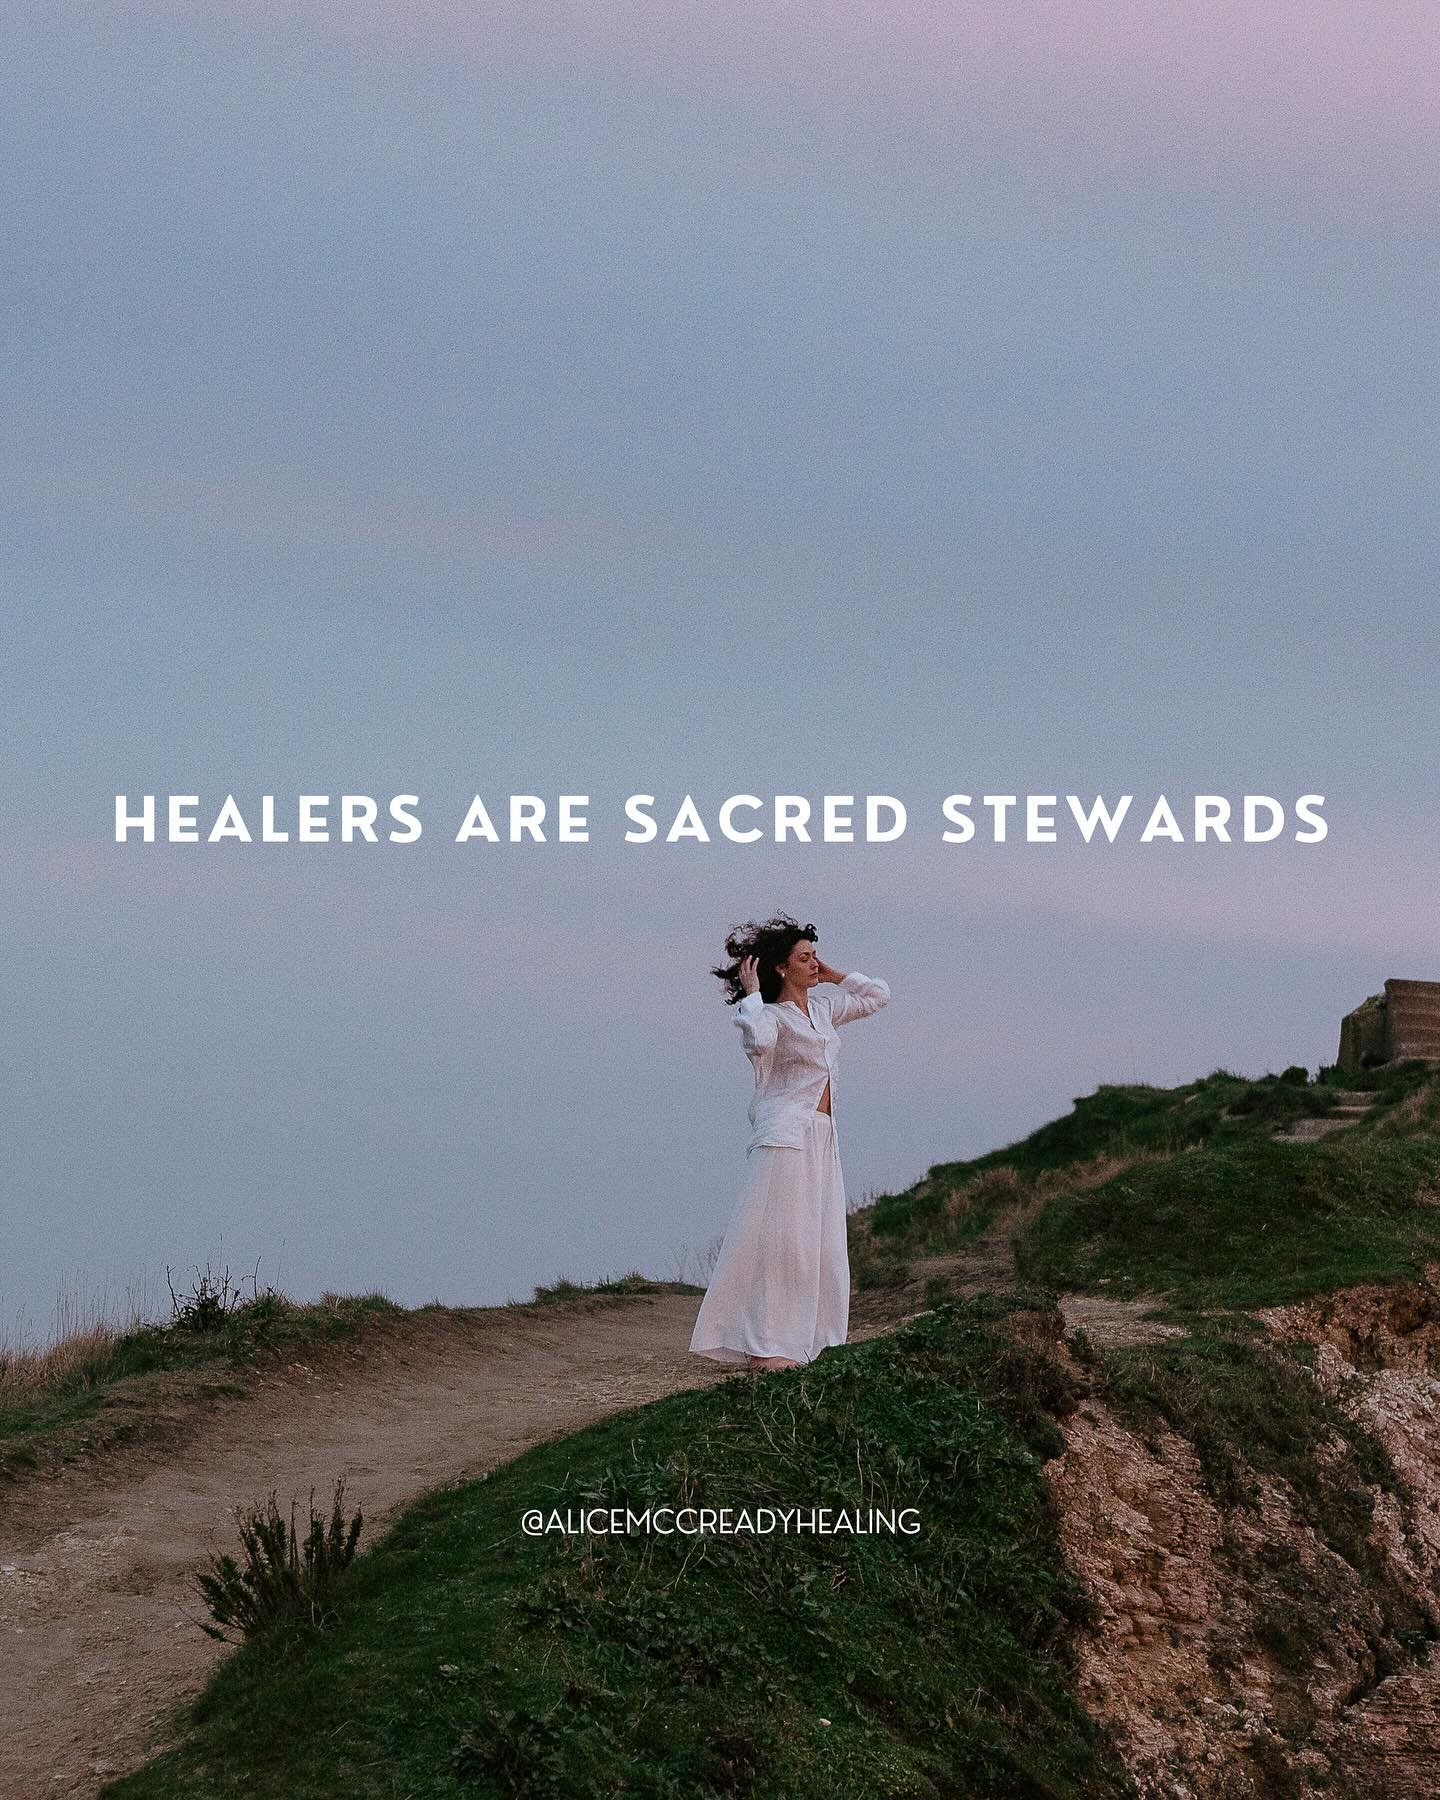 The earth needs healing, just like we do. All generous healers need healing too.

I believe there was a time when we understood that part of our humanness meant caring for nature and all of her gifts. To steward life and life force.

To me, being a h